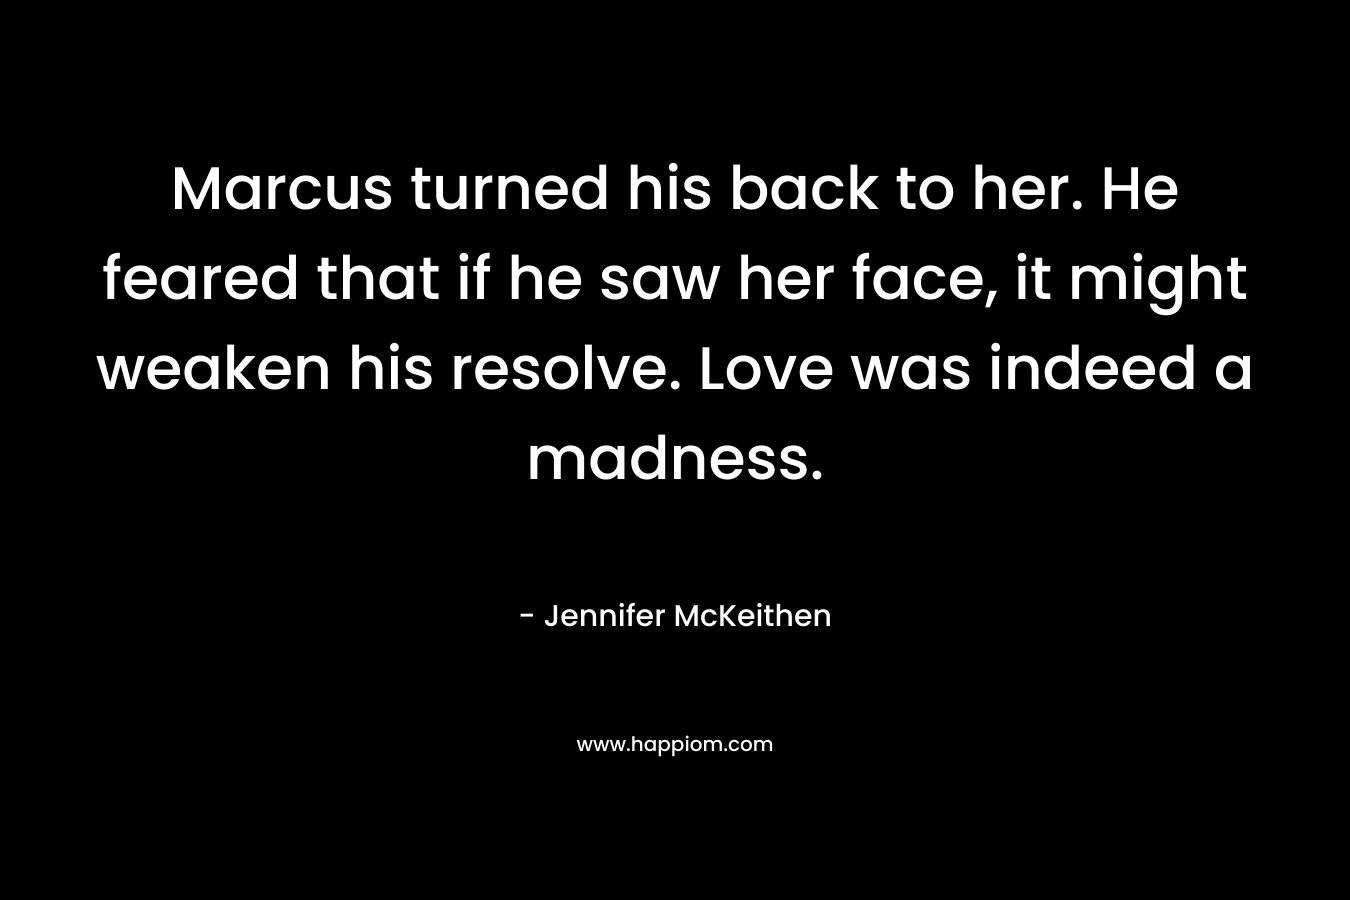 Marcus turned his back to her. He feared that if he saw her face, it might weaken his resolve. Love was indeed a madness.